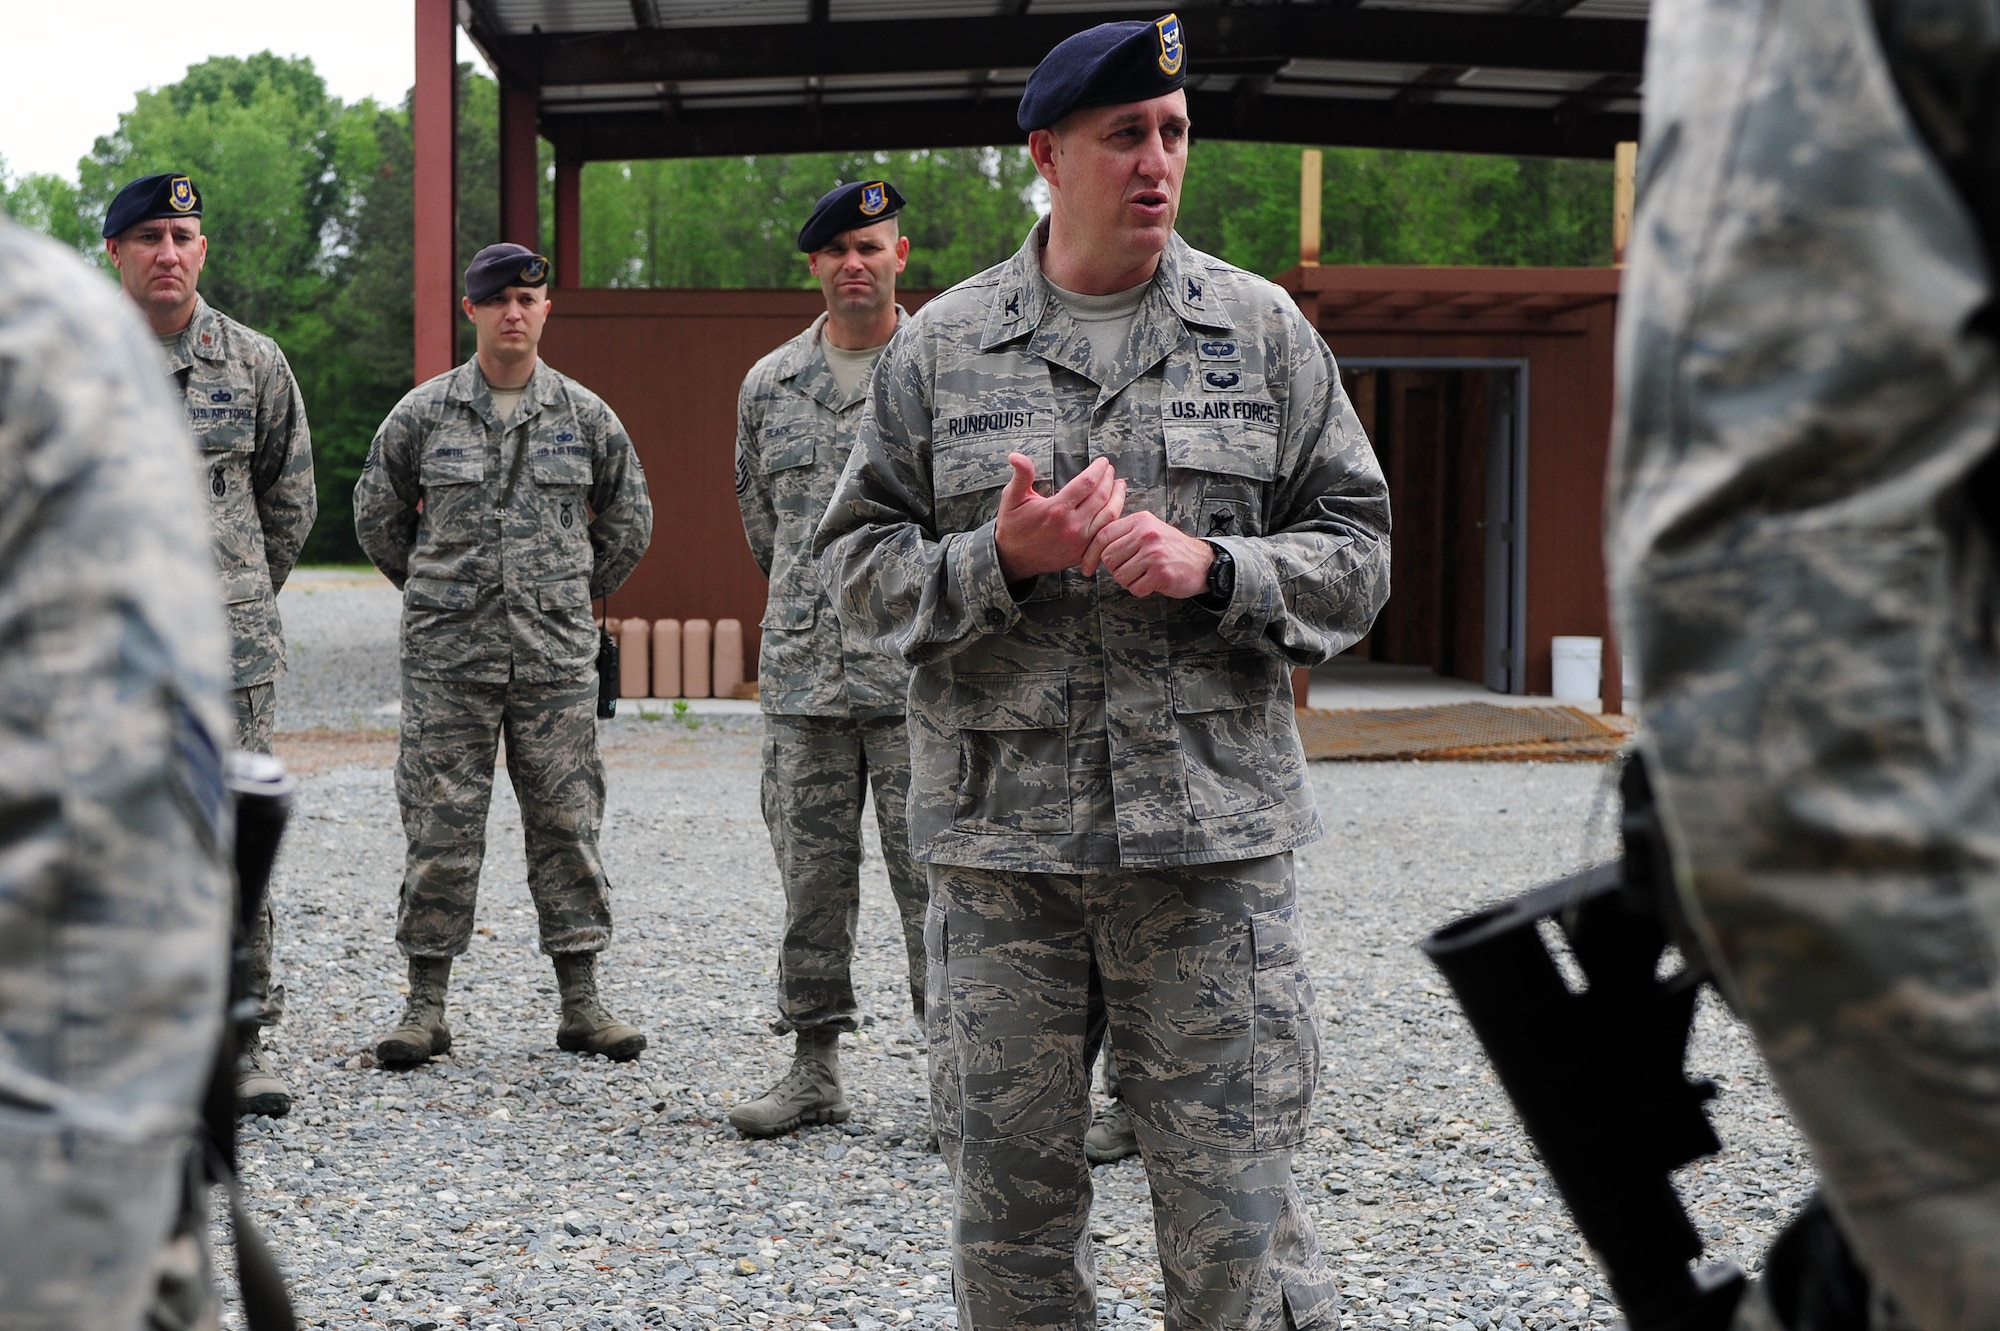 Col. Erik Rundquist, Director of Security Forces, Headquarters Air Combat Command, speaks with Airmen from the 4th Security Forces Squadron after an exercise, April 29, 2014, at Seymour Johnson Air Force Base, N.C. Rundquist visited the 4th SFS to observe first-hand operations and procedures the Airmen perform daily. (U.S. Air Force photo/Senior Airman John Nieves Camacho)